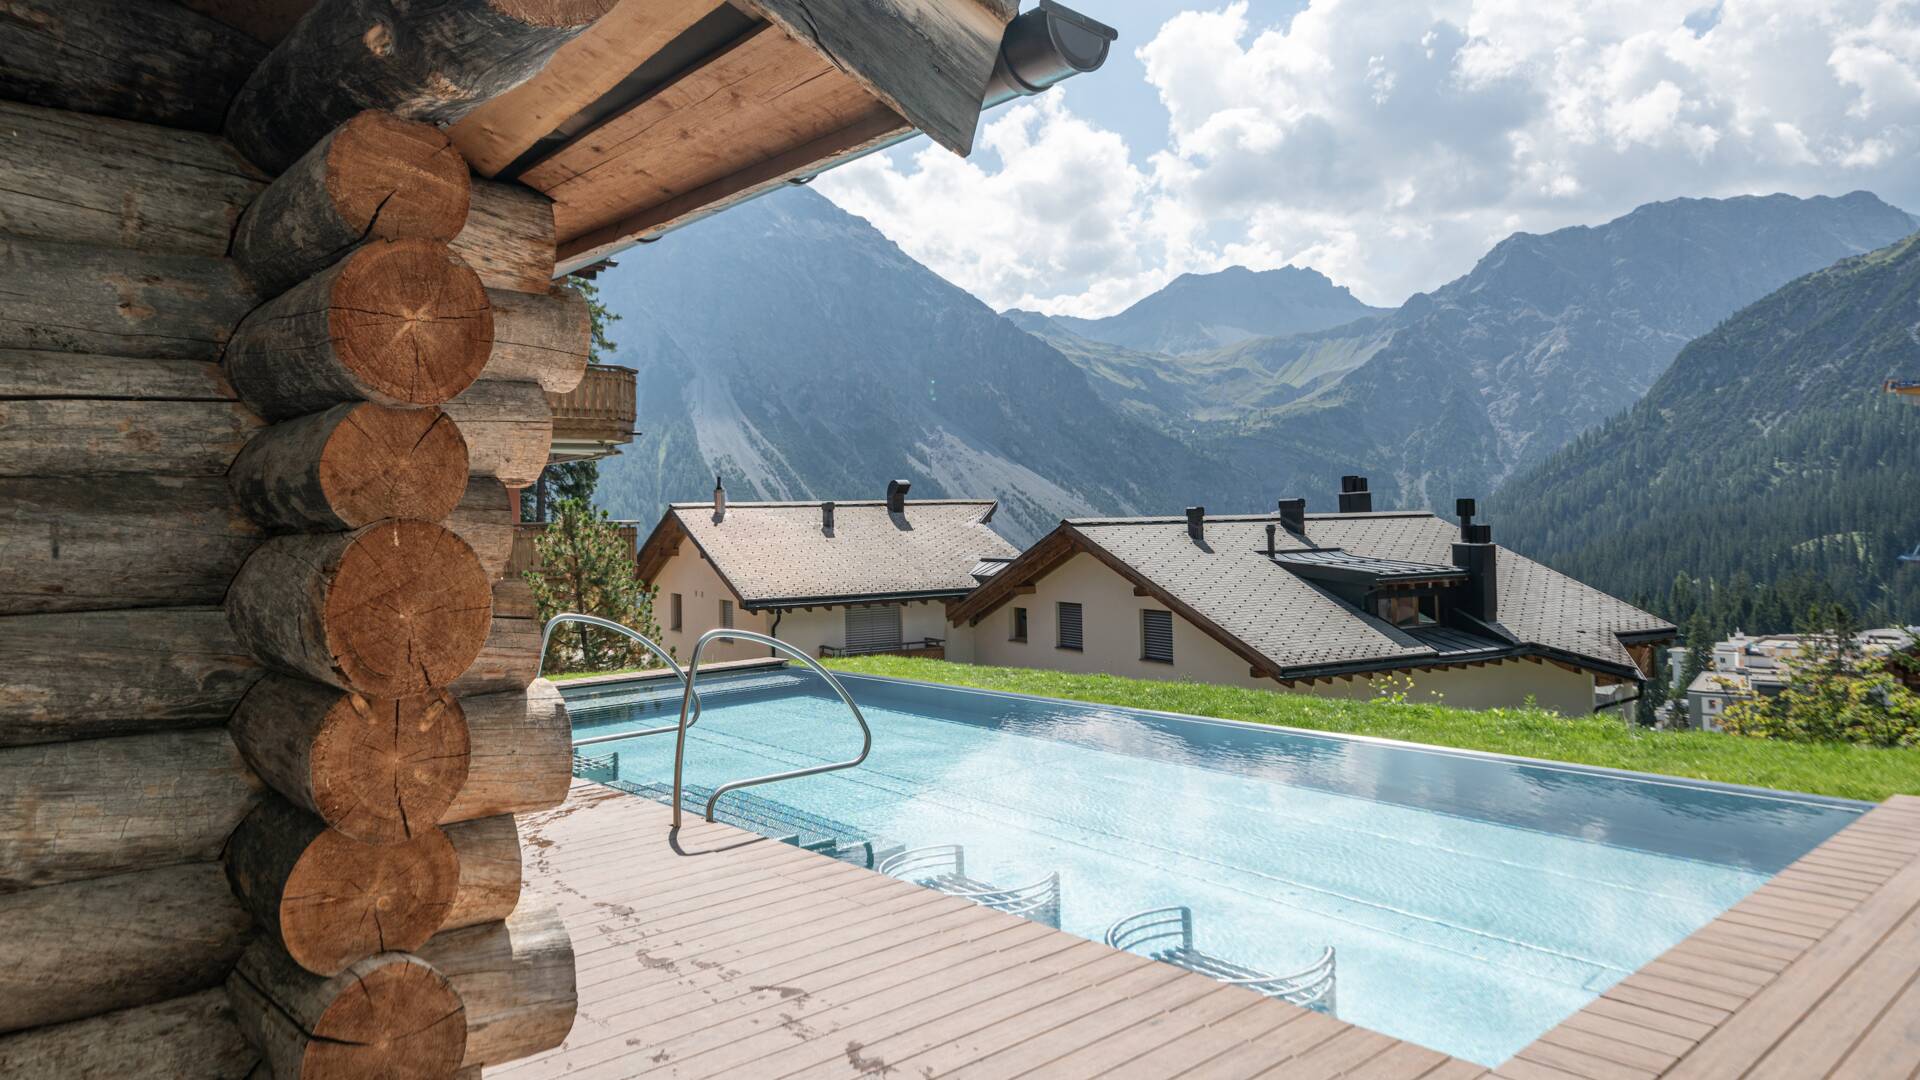 New outdoor pool with mountain view